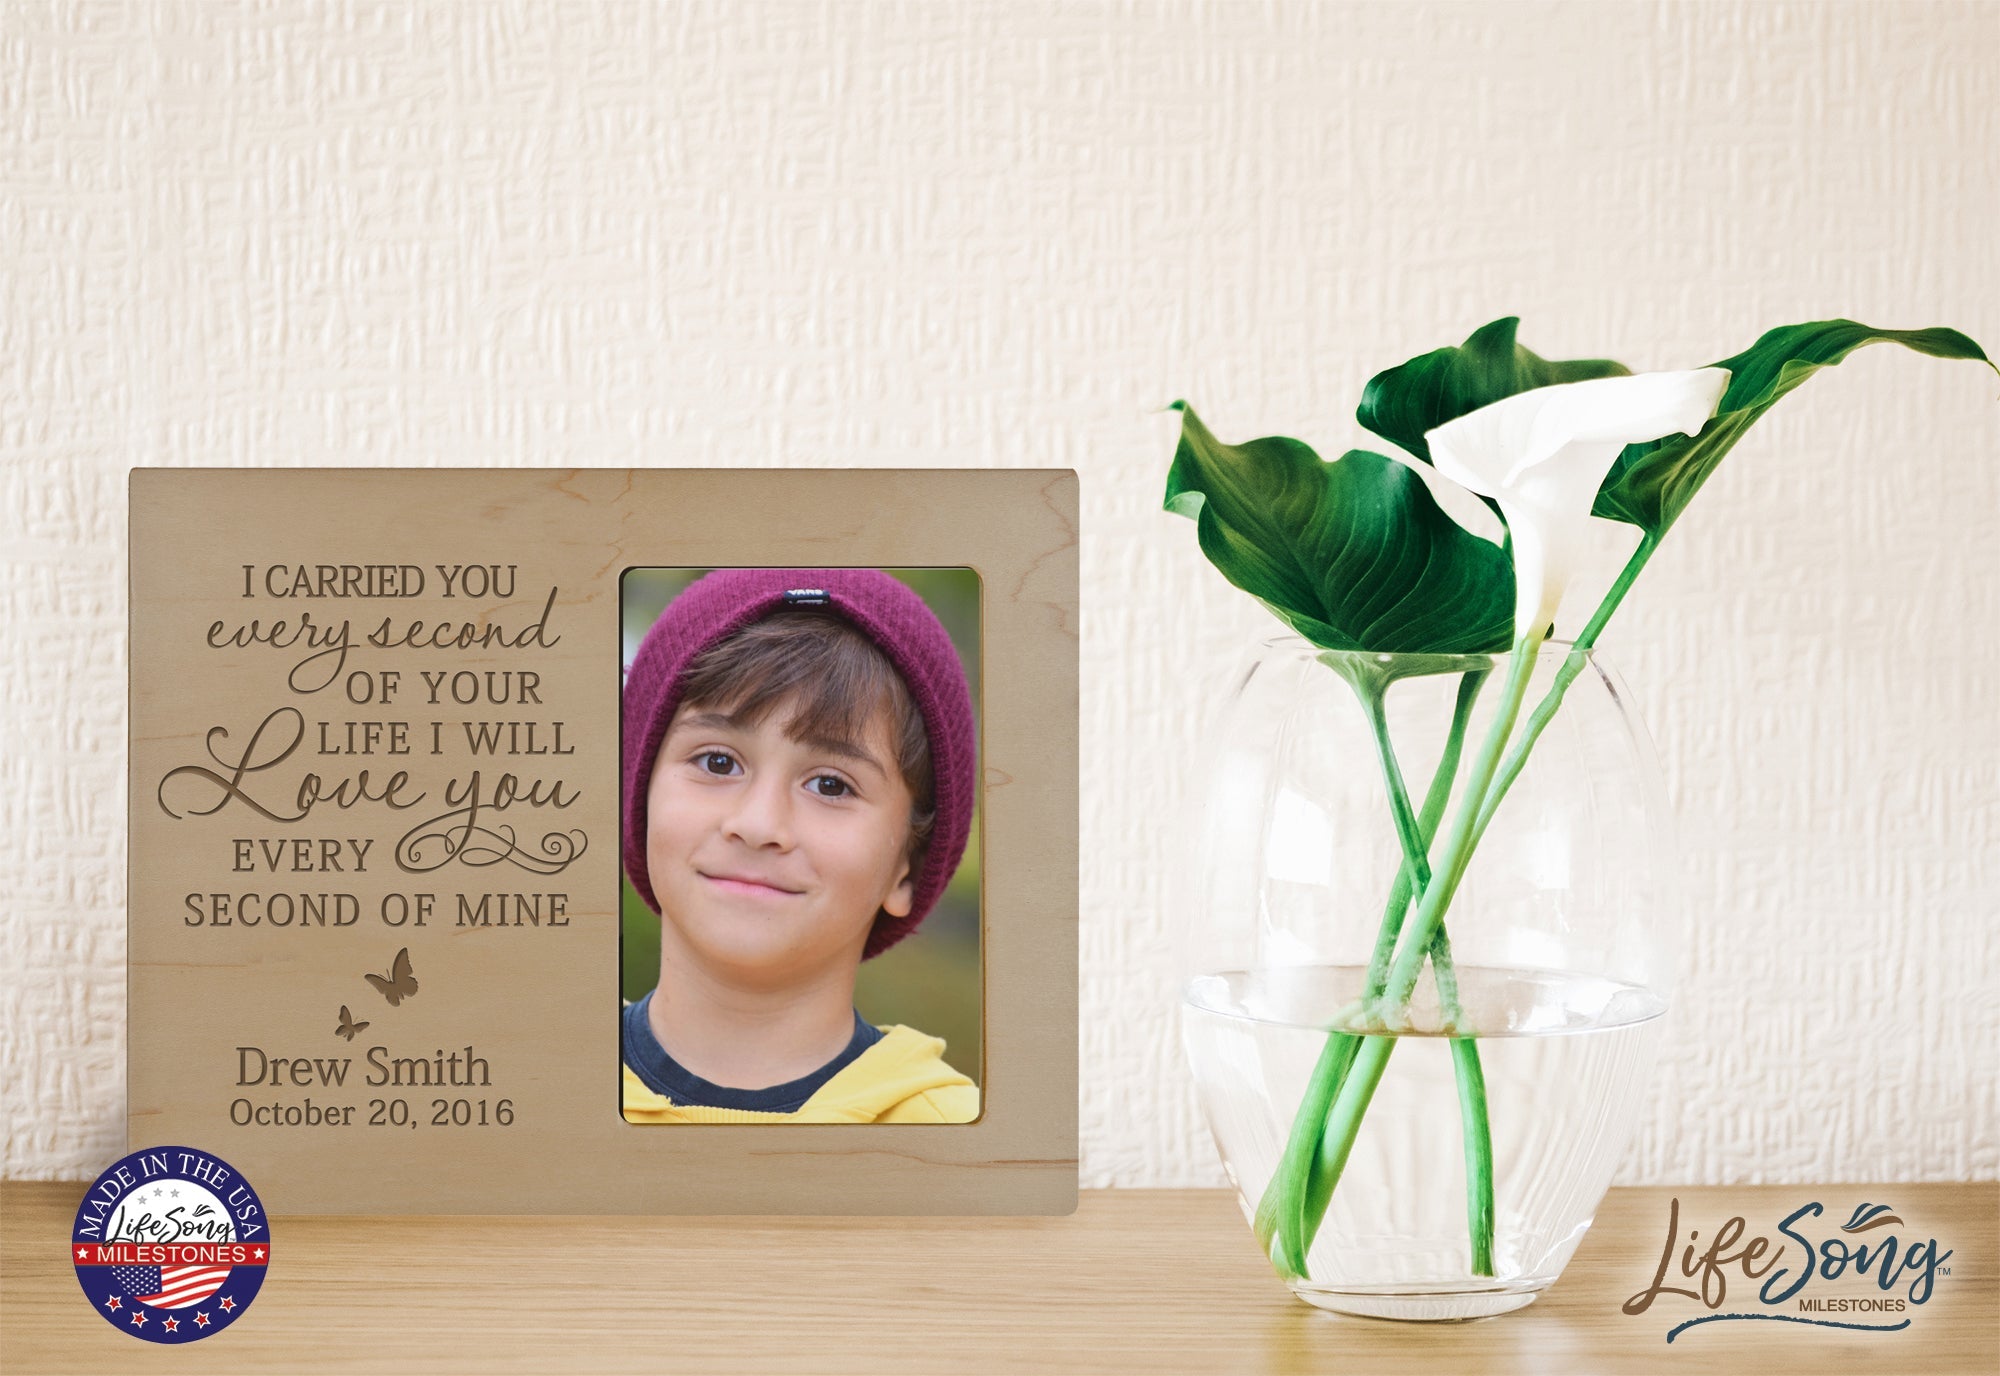 Personalized Wooden Memorial 8x10 Picture Frame holds 4x6 photo I Carried You Every Second - LifeSong Milestones